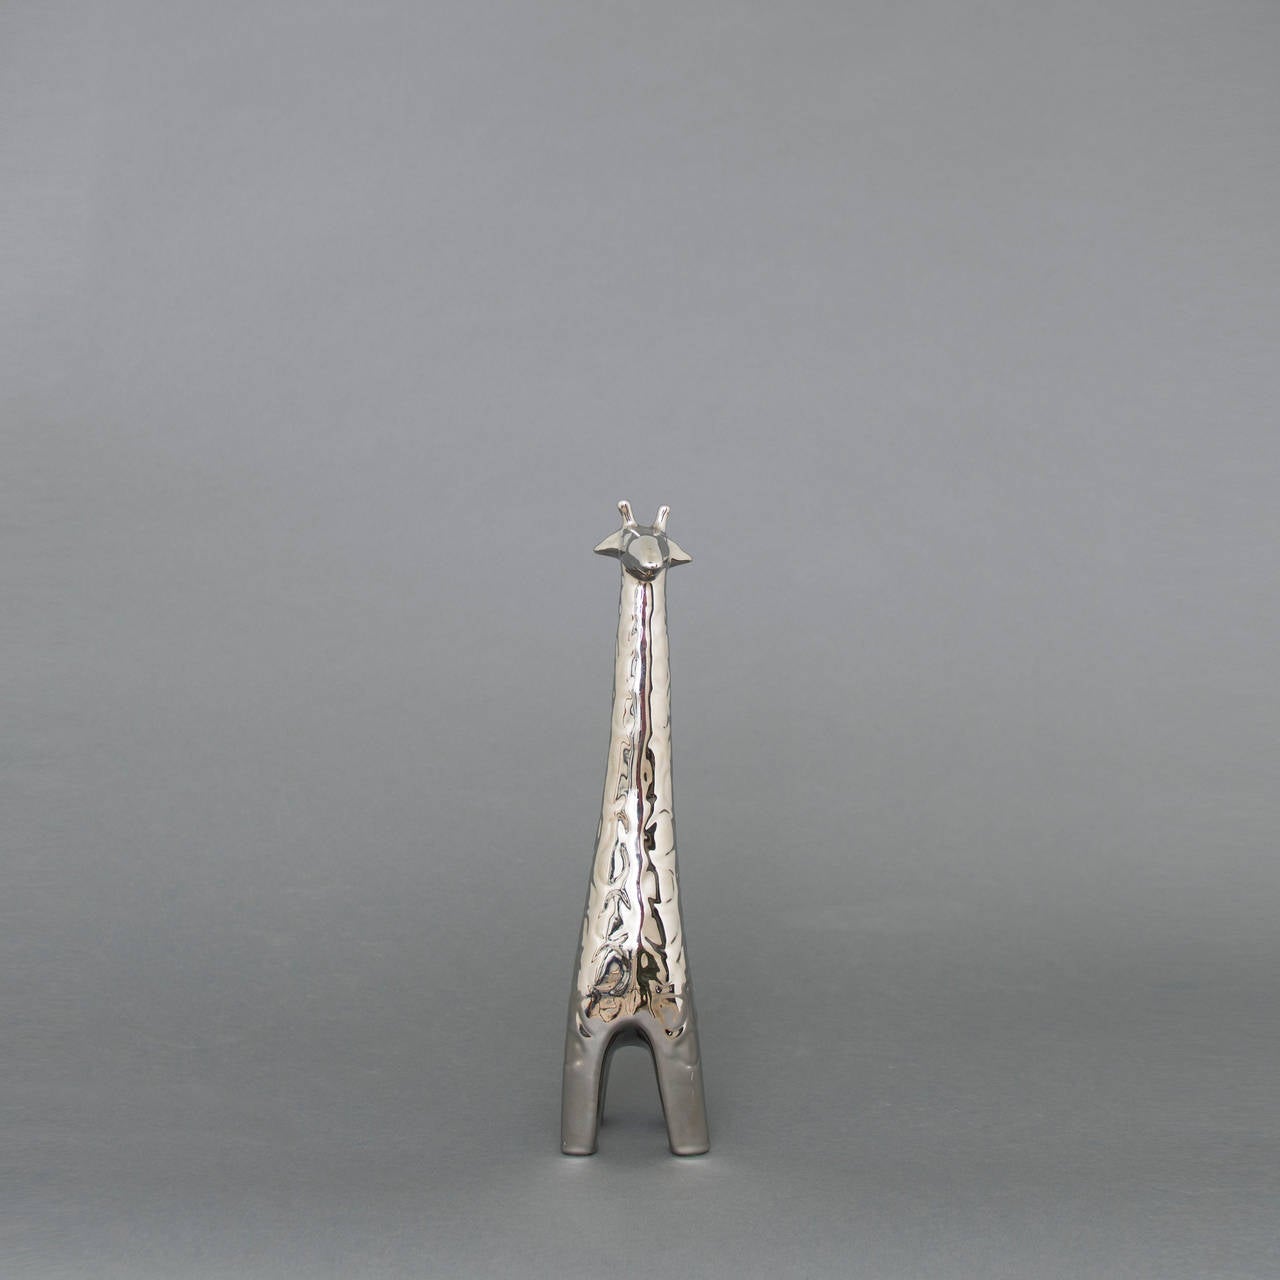 Jaru metallic silver giraffe from the 1970s - makes a great addition to a discerning interior.